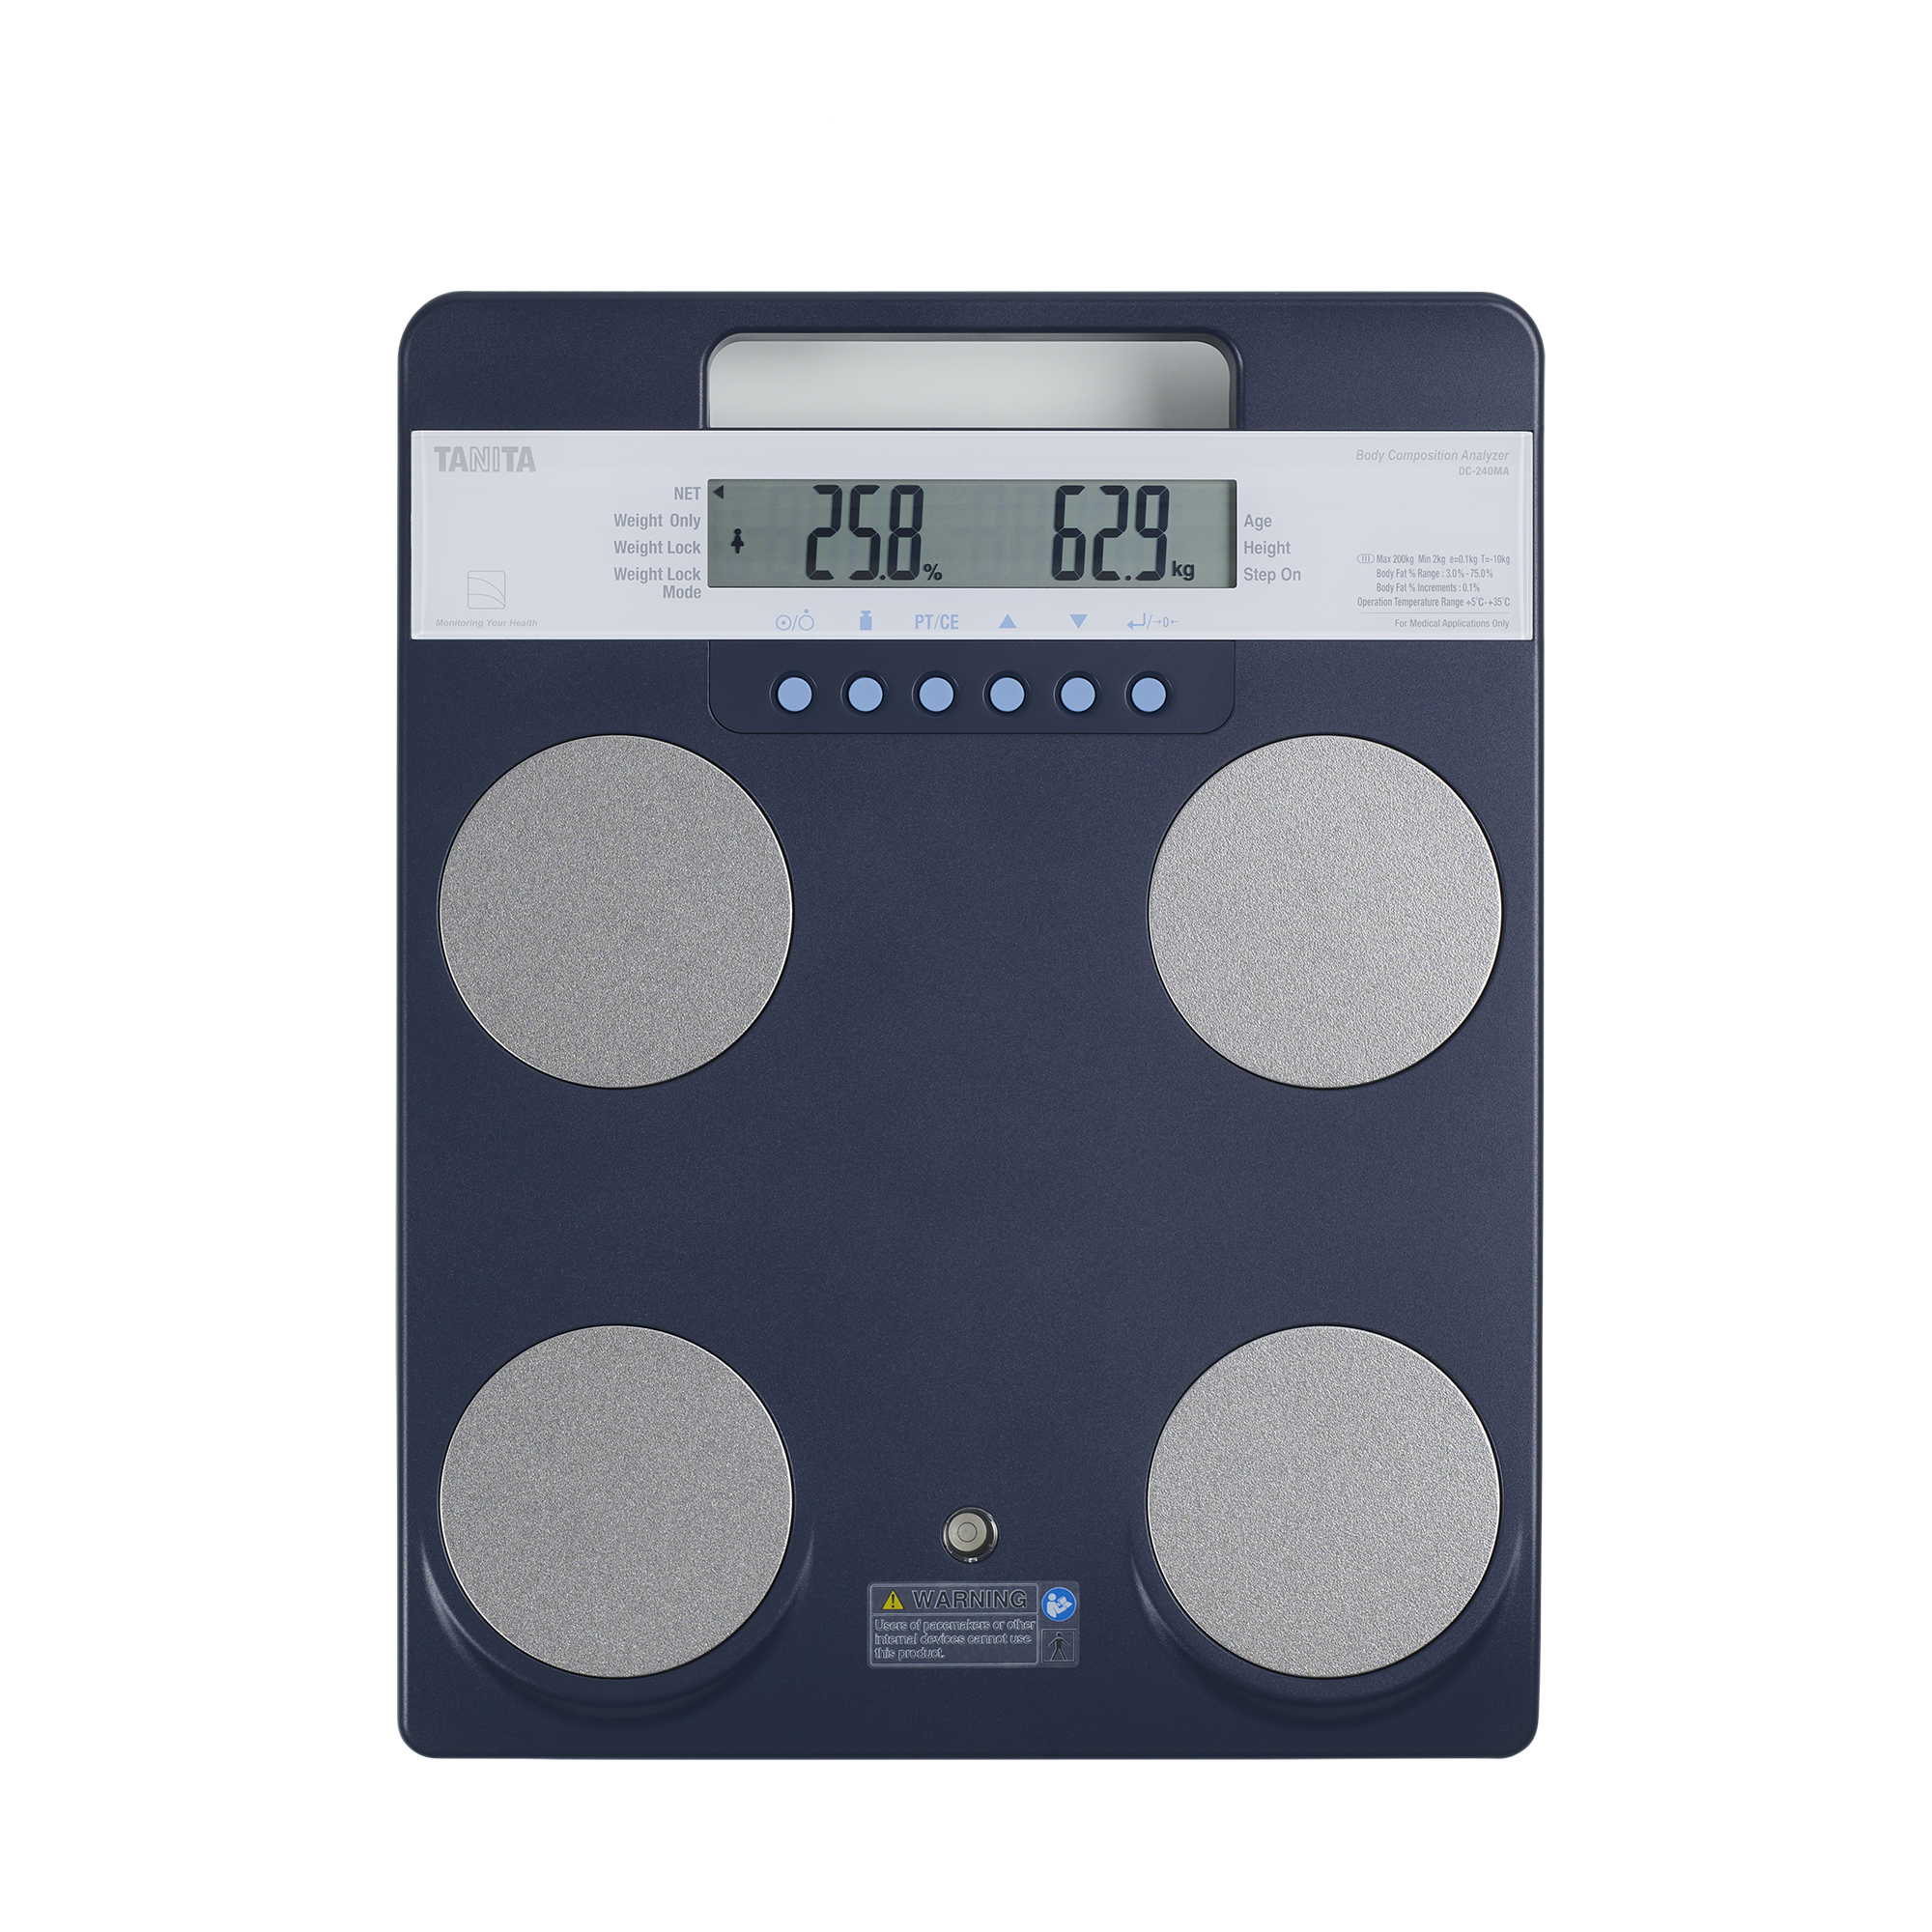 DC-240 Body Composition Monitor